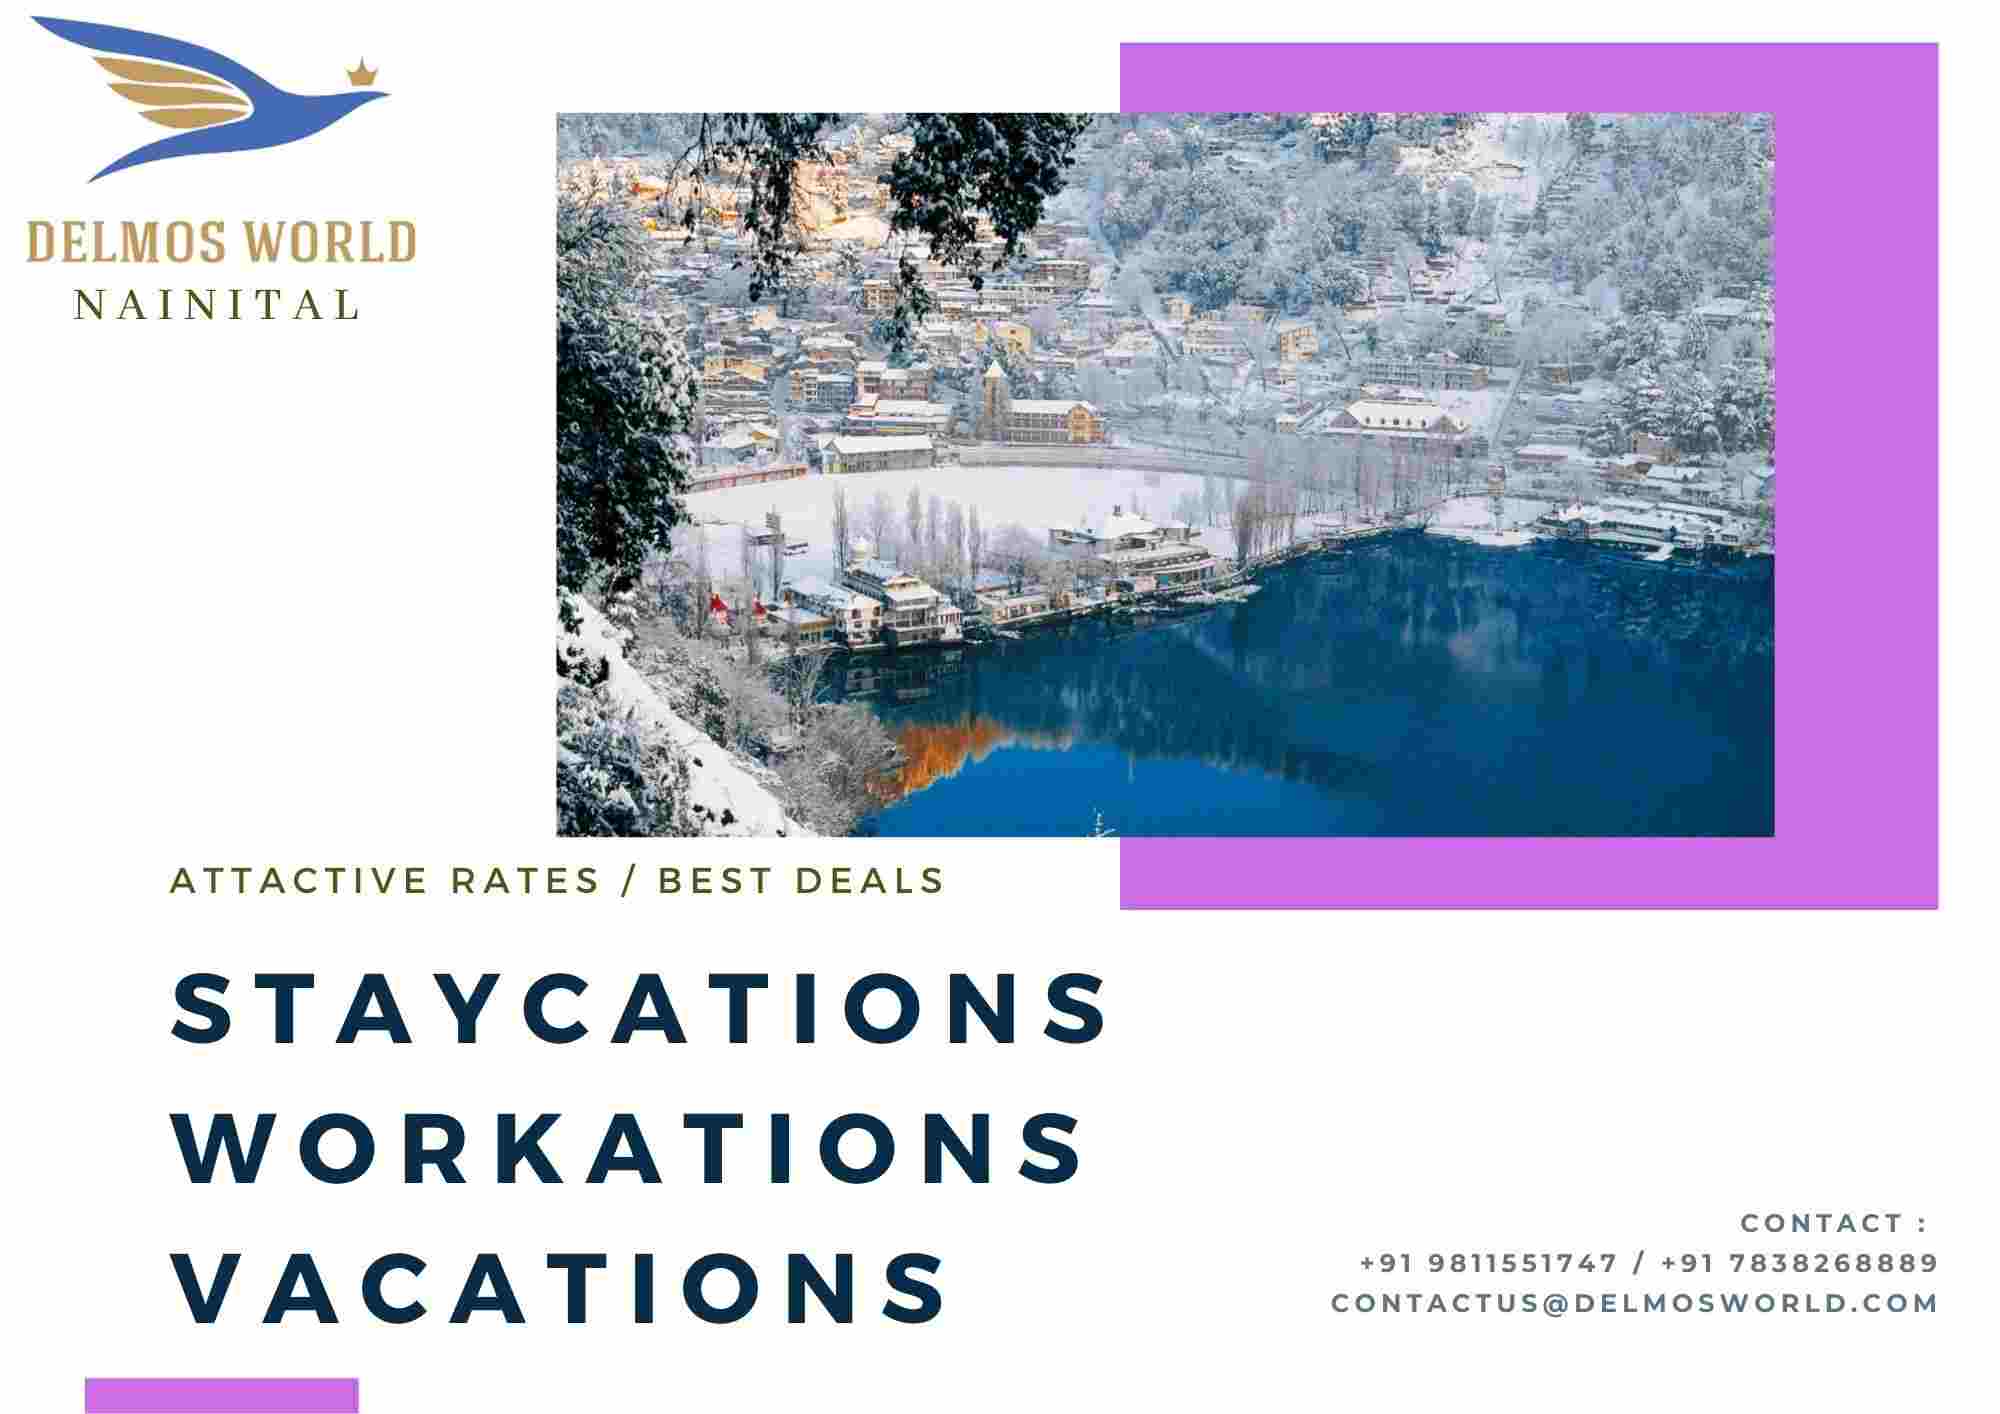 Staycations - Workations - Vacations